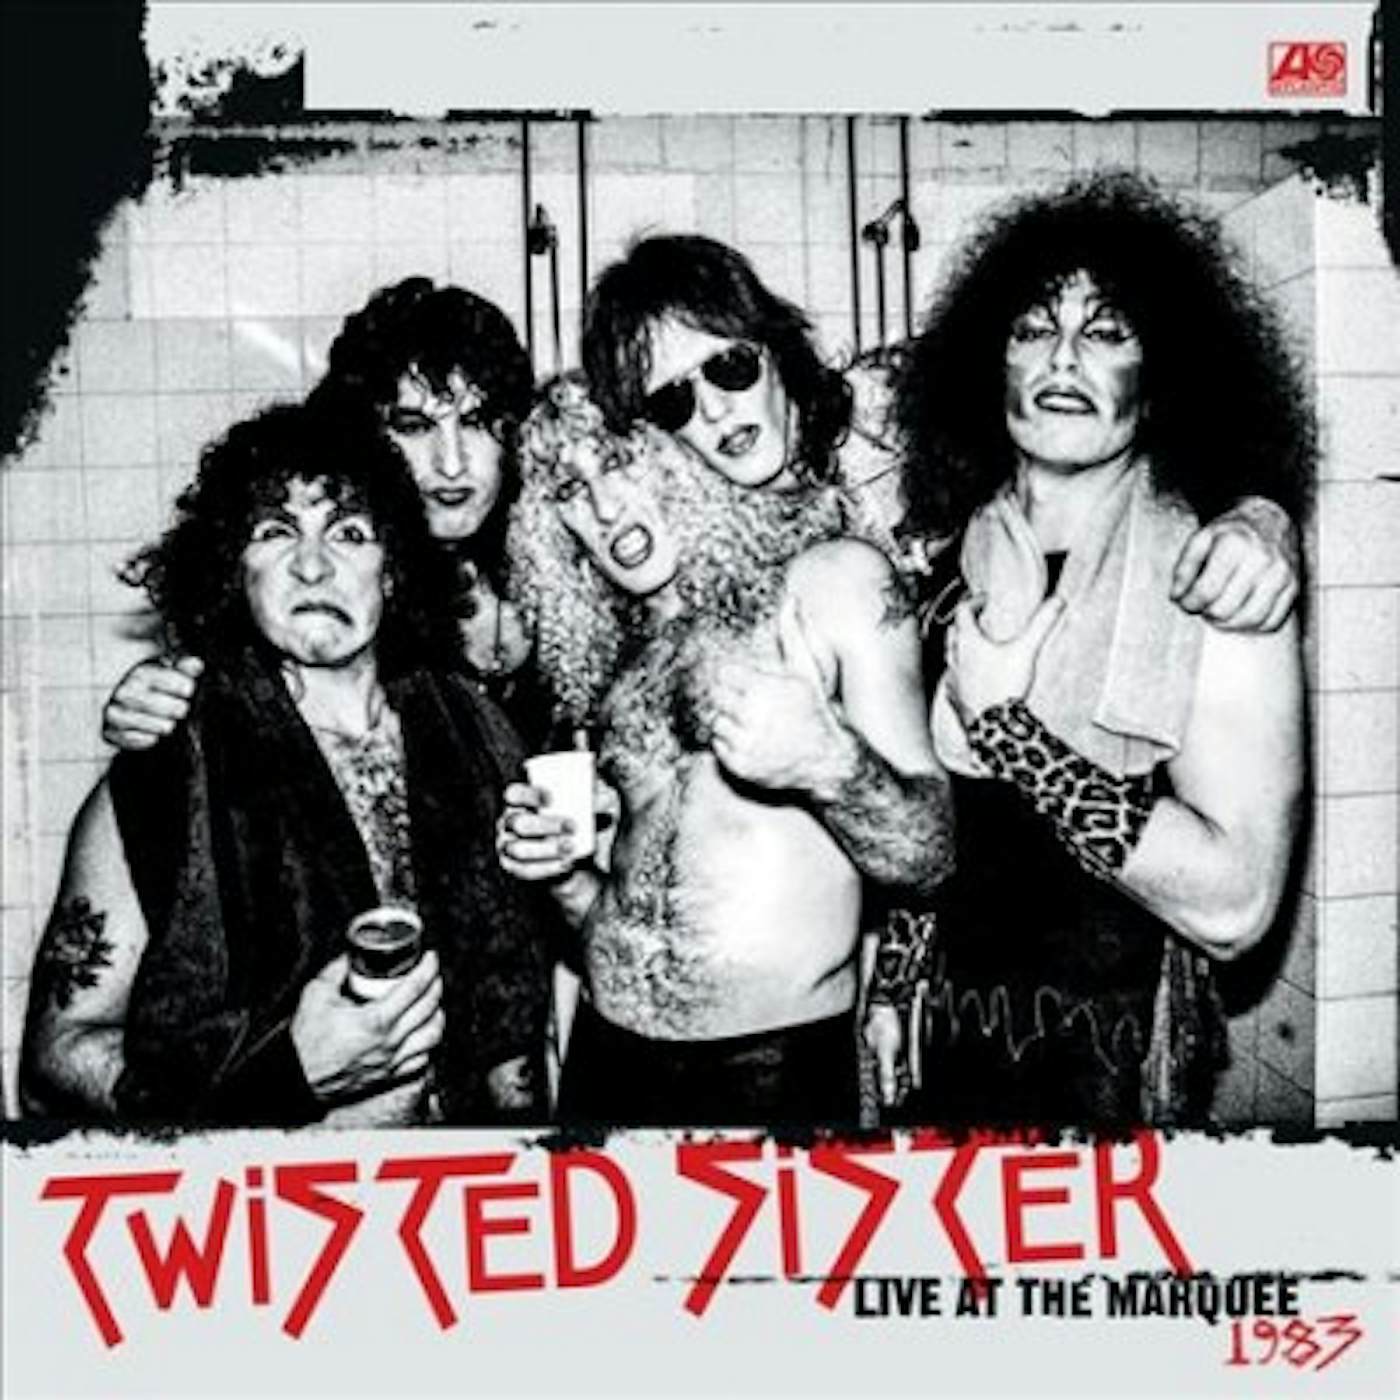 Twisted Sister LIVE AT THE MARQUEE 1983 (2LP) Vinyl Record